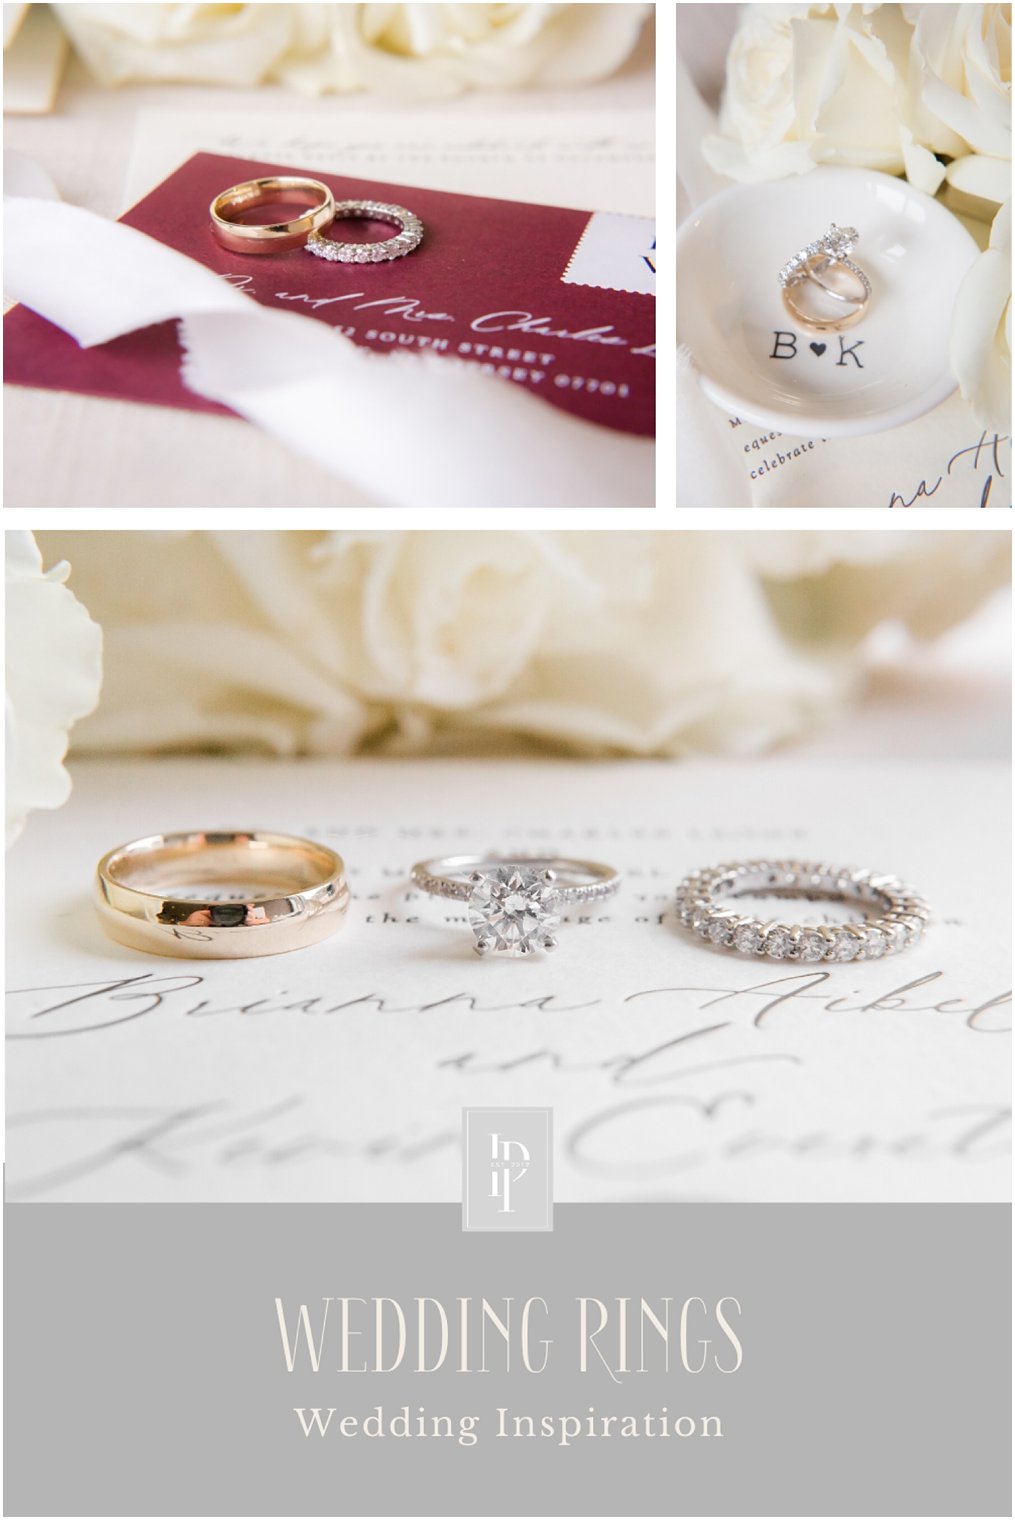 Classic wedding rings for a timeless wedding at Park Chateau Estate and Gardens | Photos by Idalia Photography